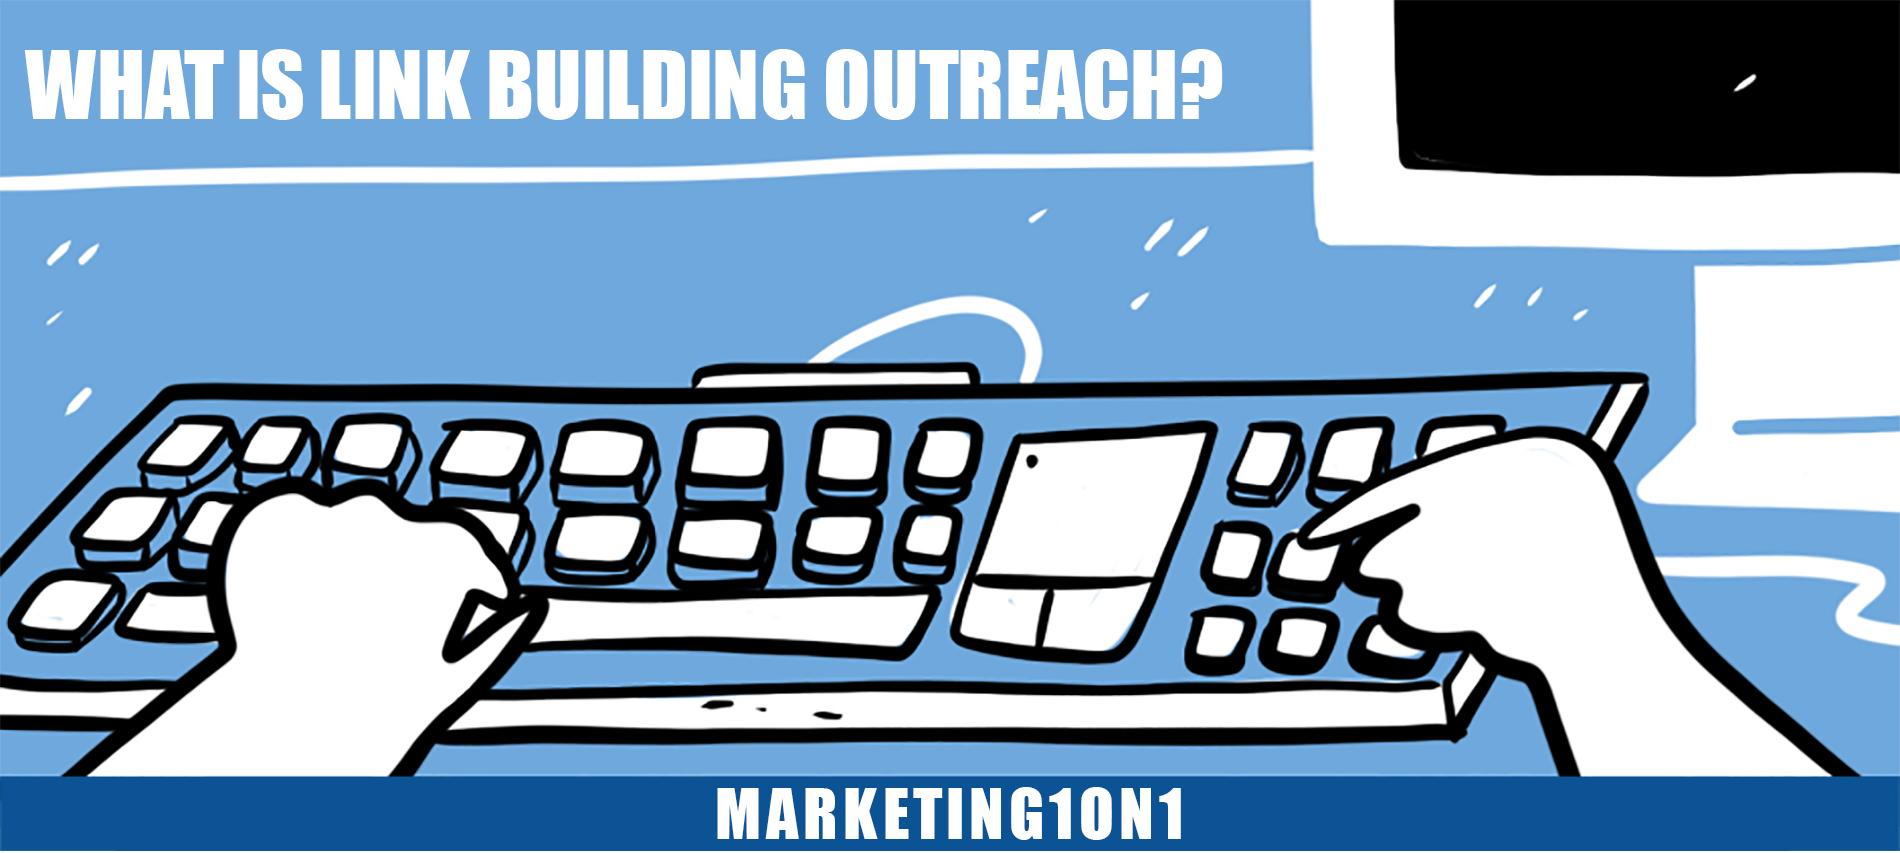 What is link building outreach?